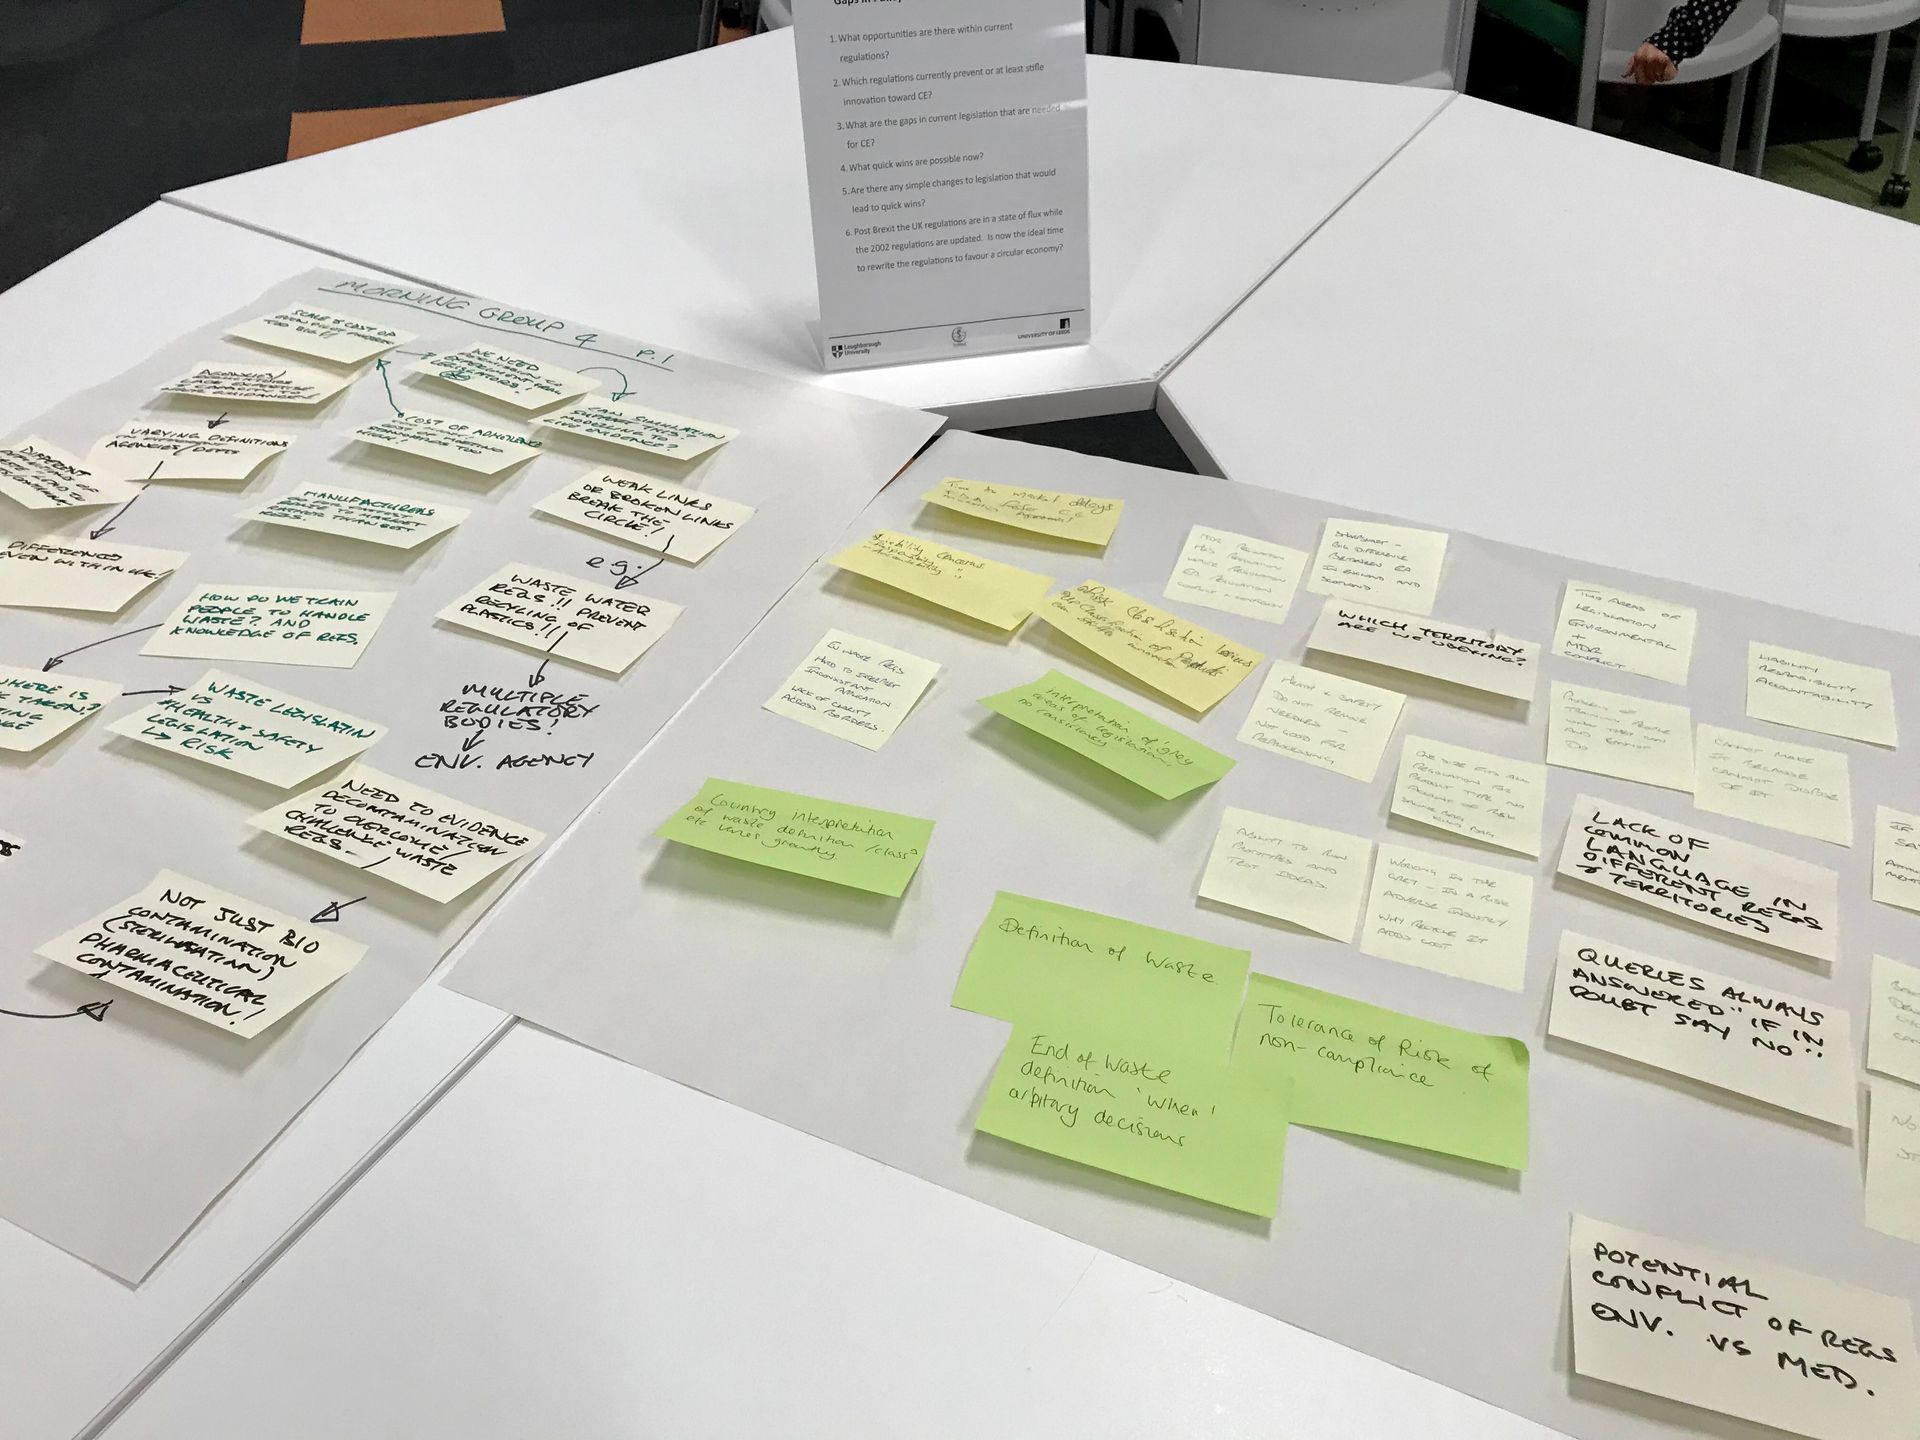 Photo of flip chart sheets and post-it notes generated during workshop